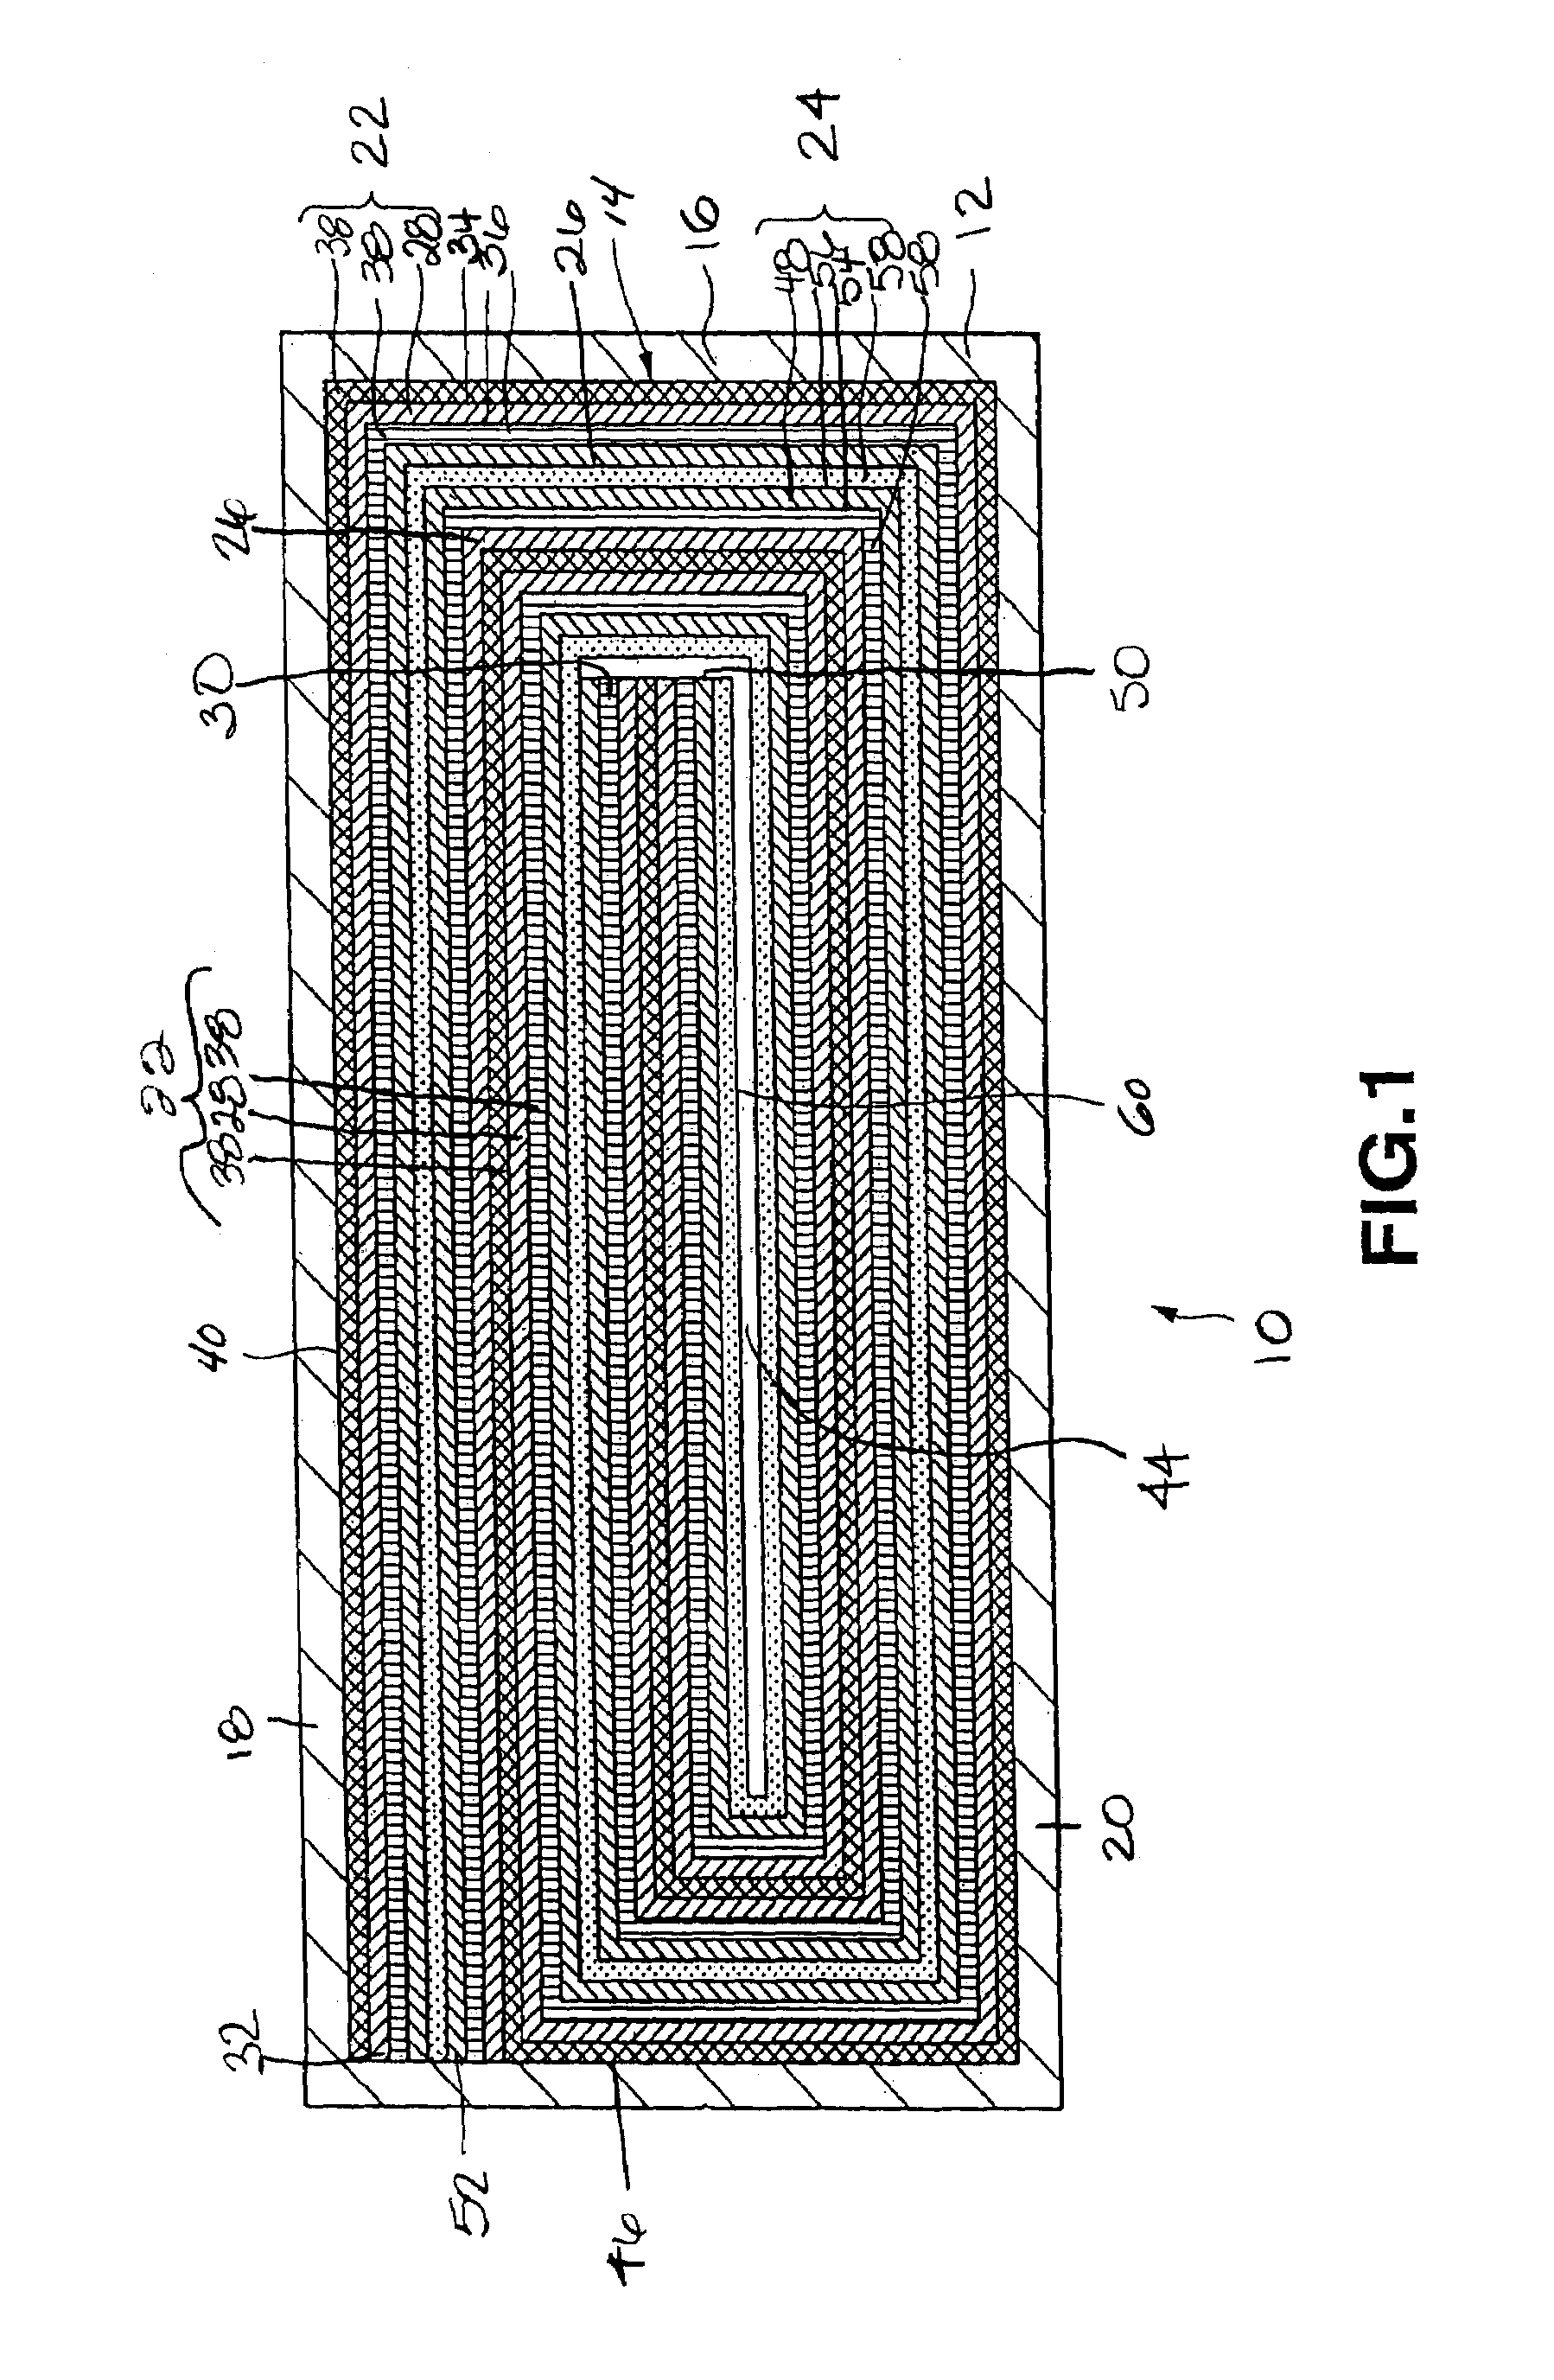 Non-aqueous electrolyte cell and solid electrolyte cell